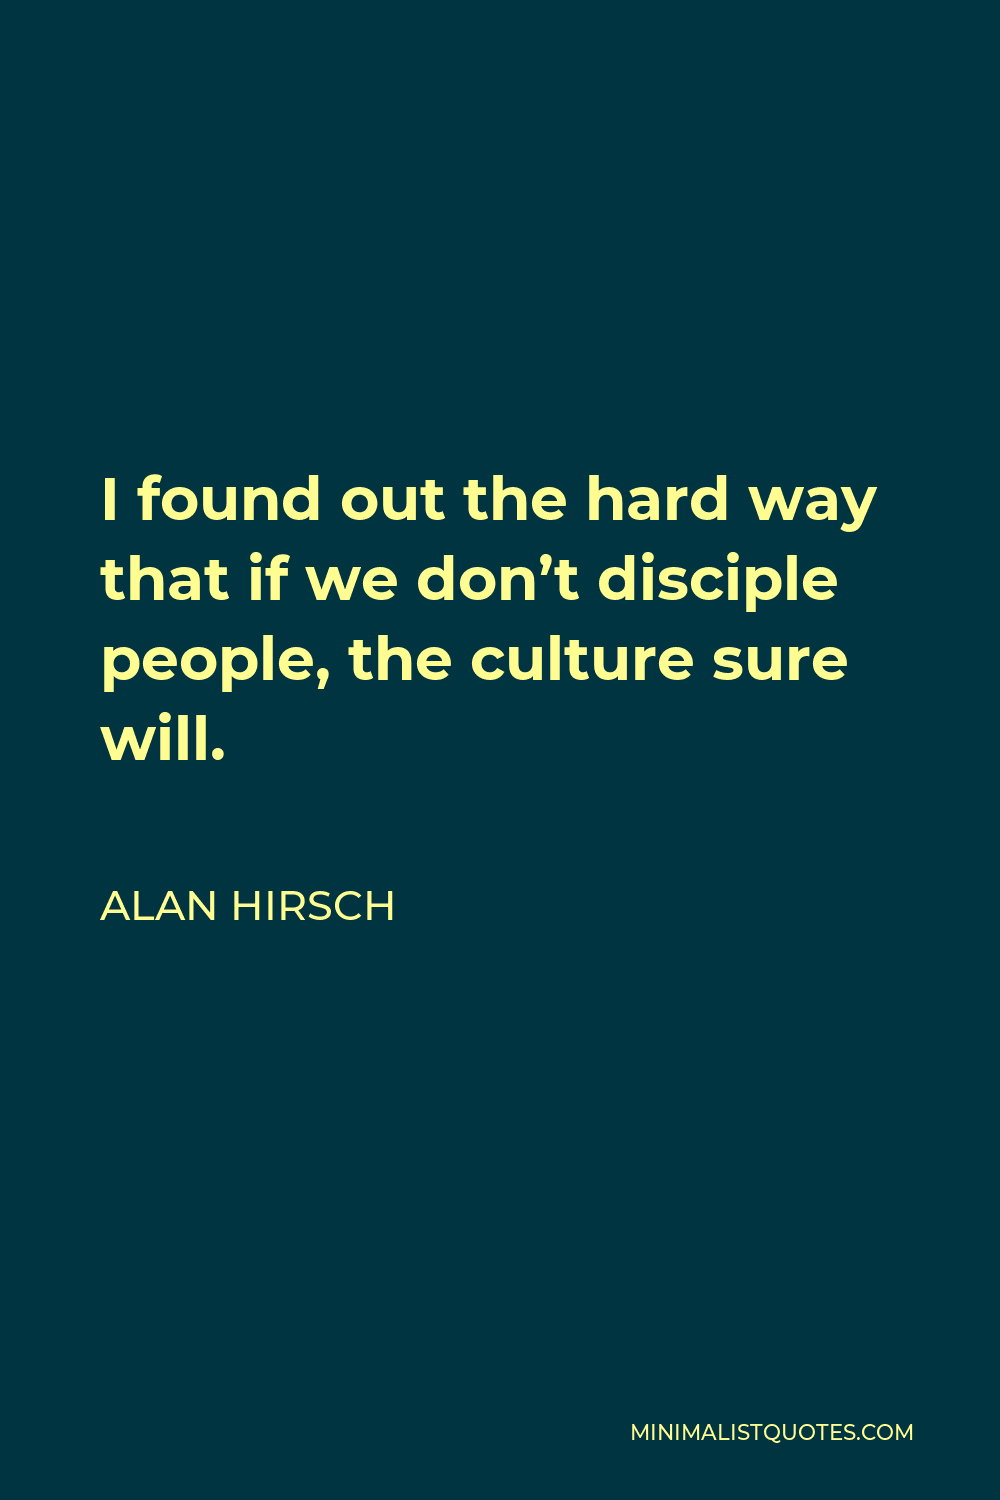 Alan Hirsch Quote - I found out the hard way that if we don’t disciple people, the culture sure will.